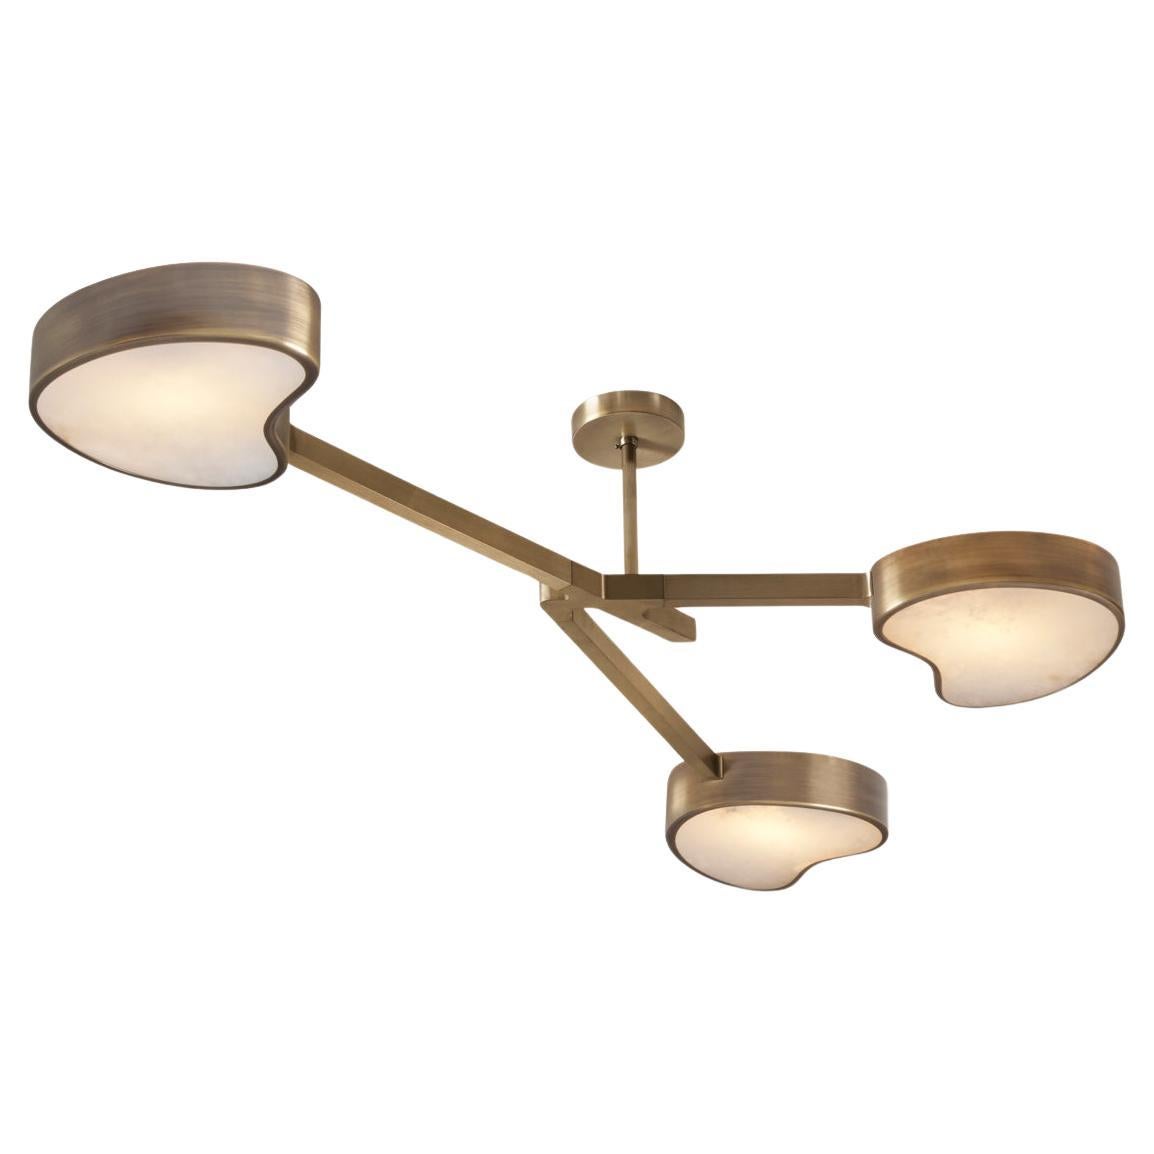 Cuore N.3 Ceiling Light by Gaspare Asaro. Bronze Finish For Sale